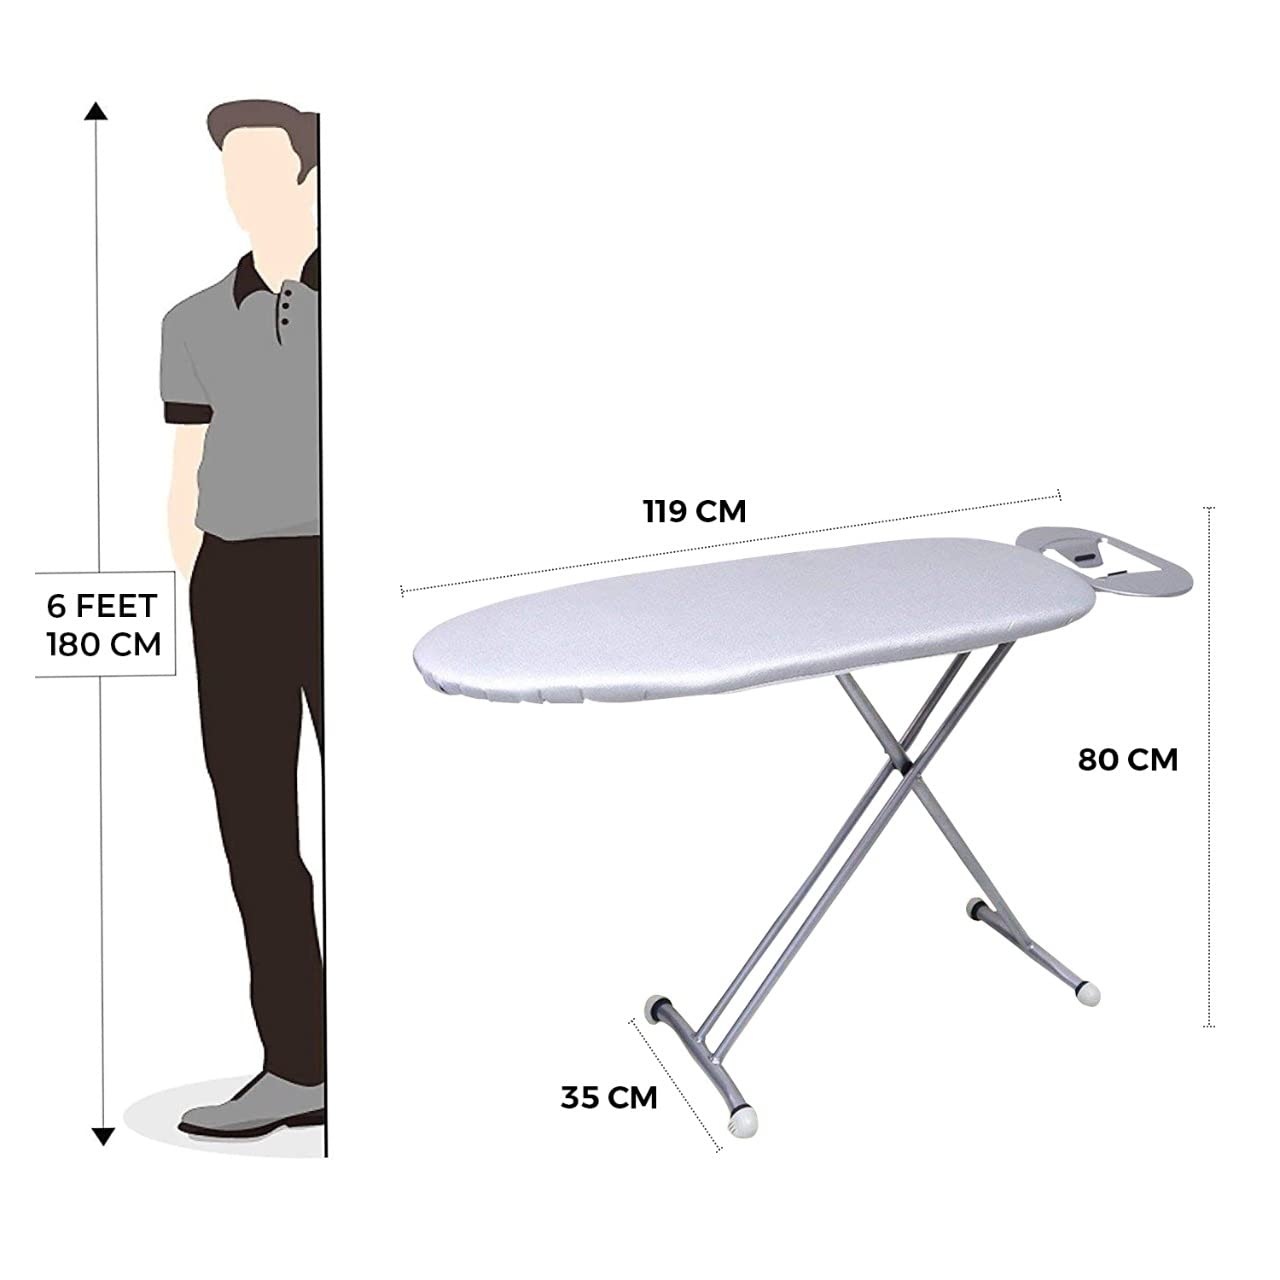 SilverLuxe Ironing Board |  H-Legs Foldable Ironing Boards with Padded Fireproof Fabric I Grey)